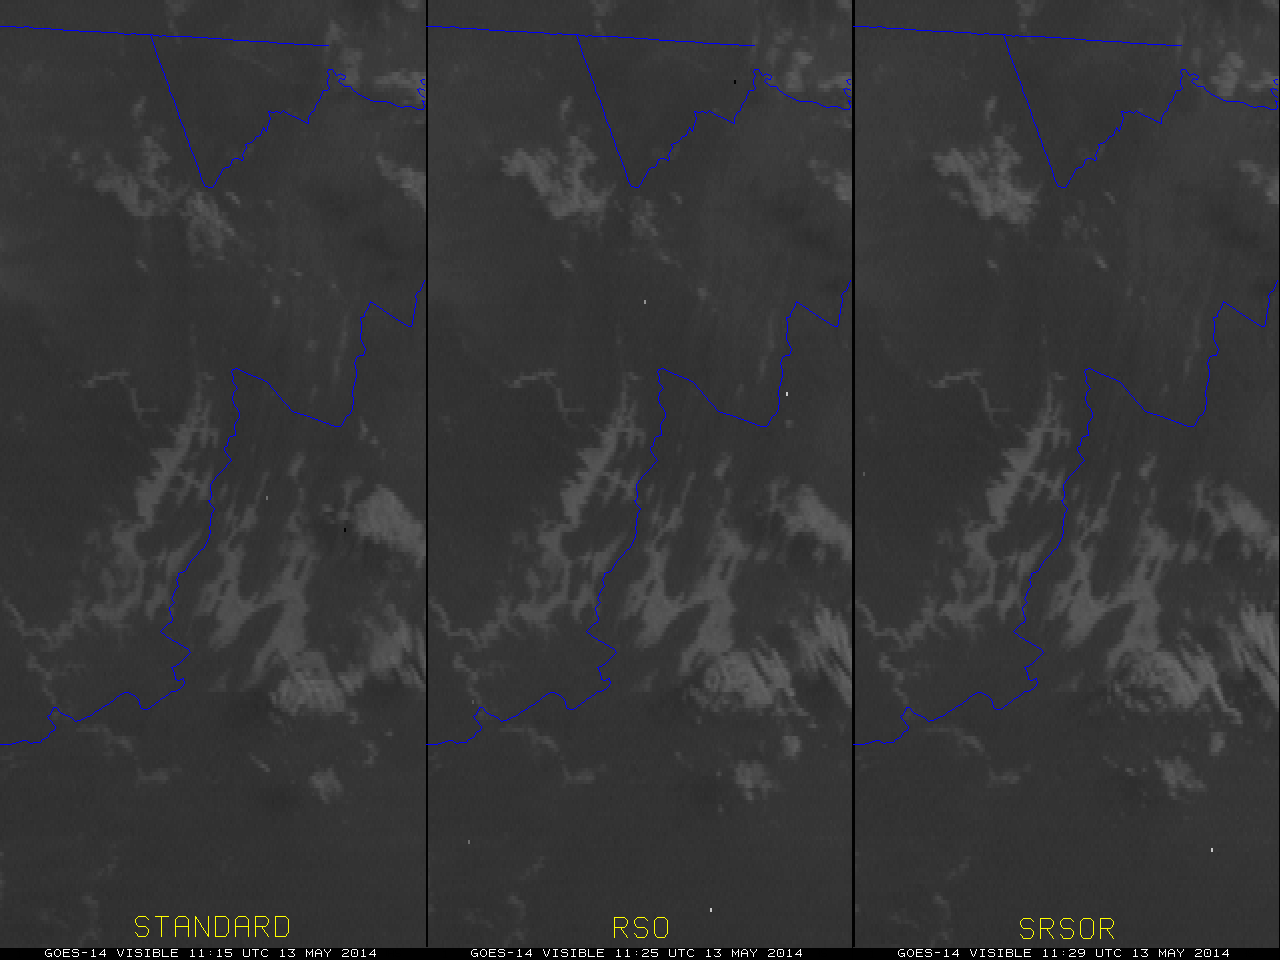 GOES-14 0.63 µm visible channel images: Standard, RSO, and SRSOR scan strategies (click to play MP4 animation)